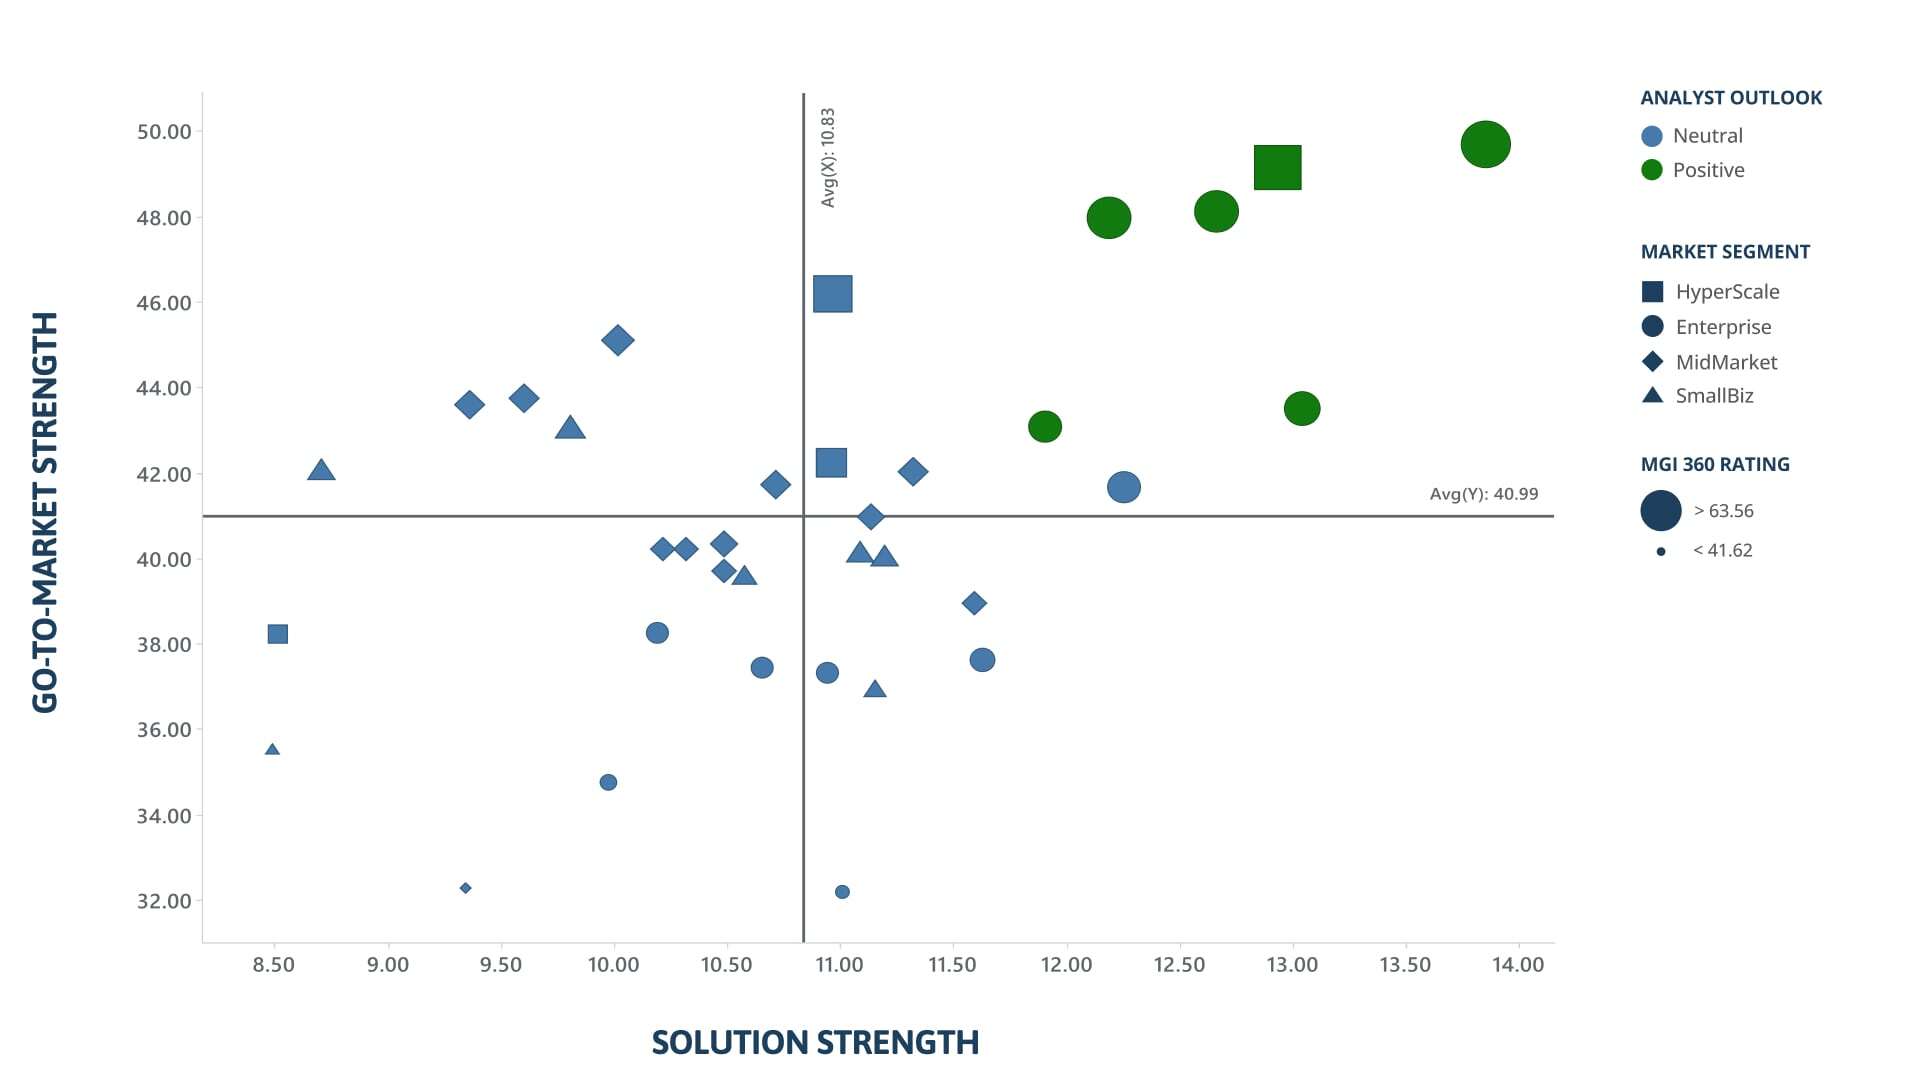 This is an example graph of the Go-To-Market vs Solution Strength data created by MGI Research